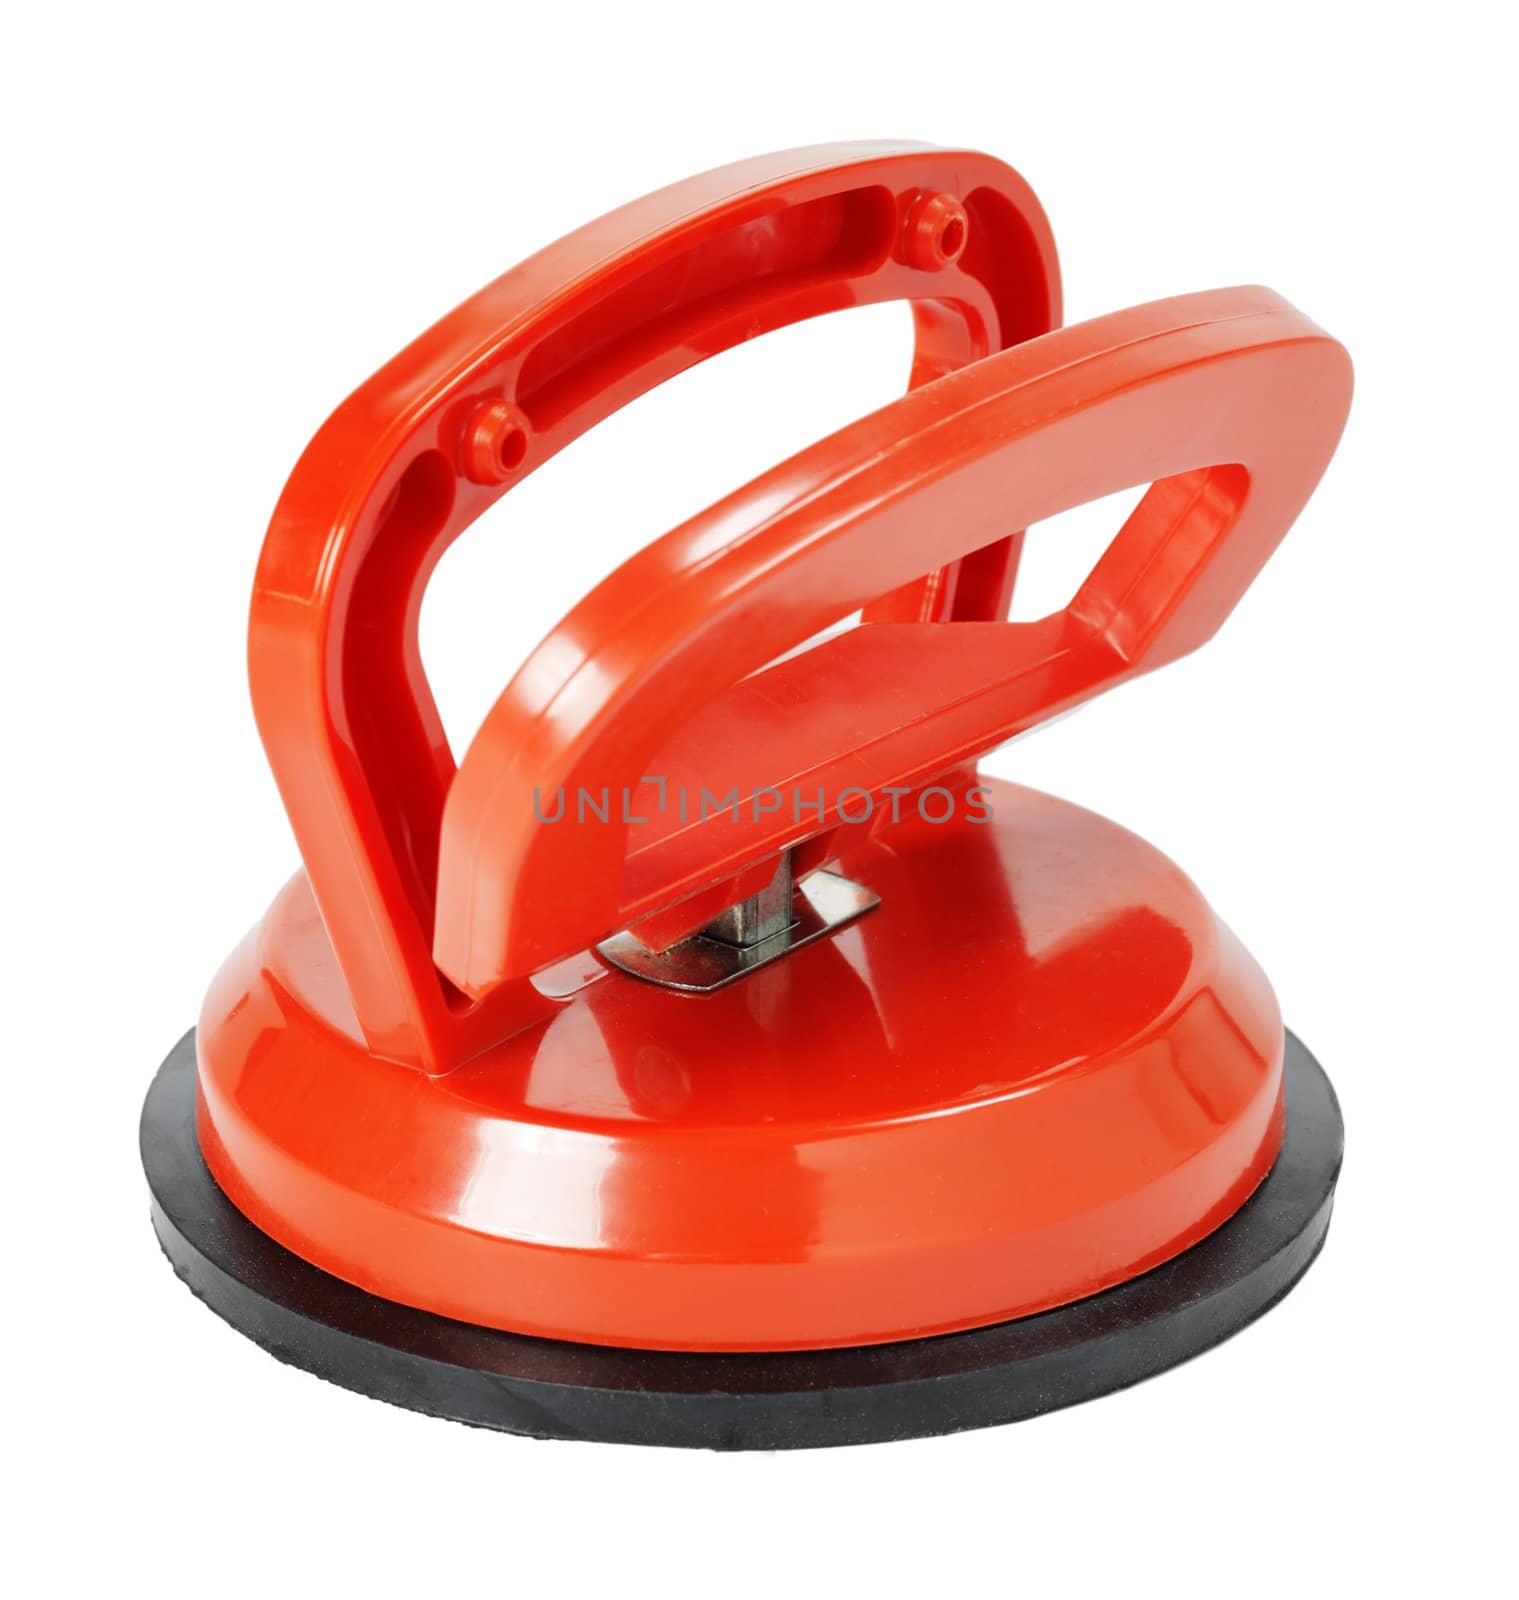 Suction Cup Tool by Stocksnapper